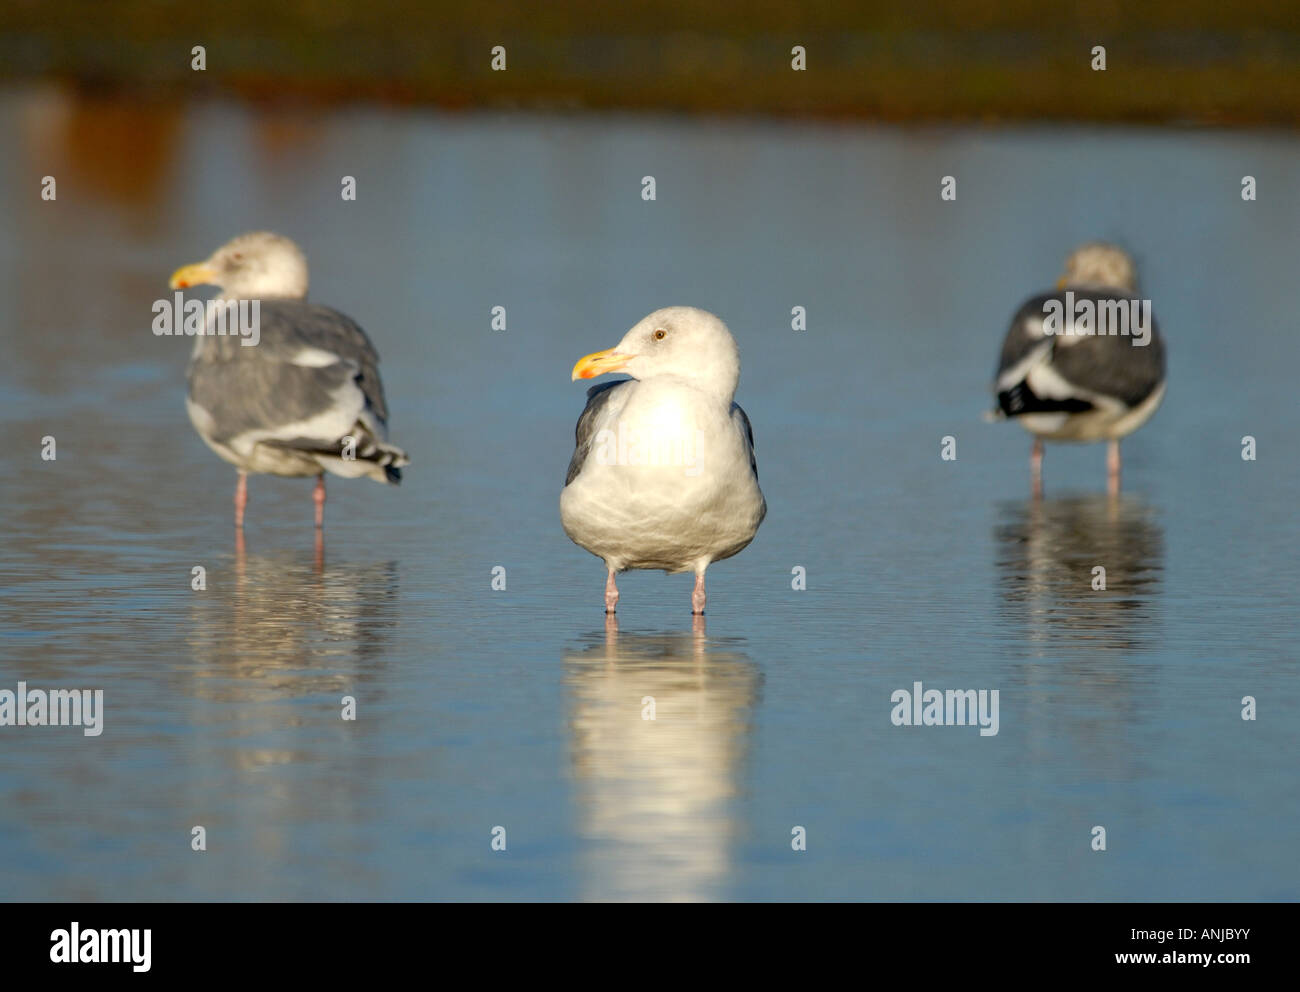 Herring Gulls standing in rain flooded water puddle Stock Photo